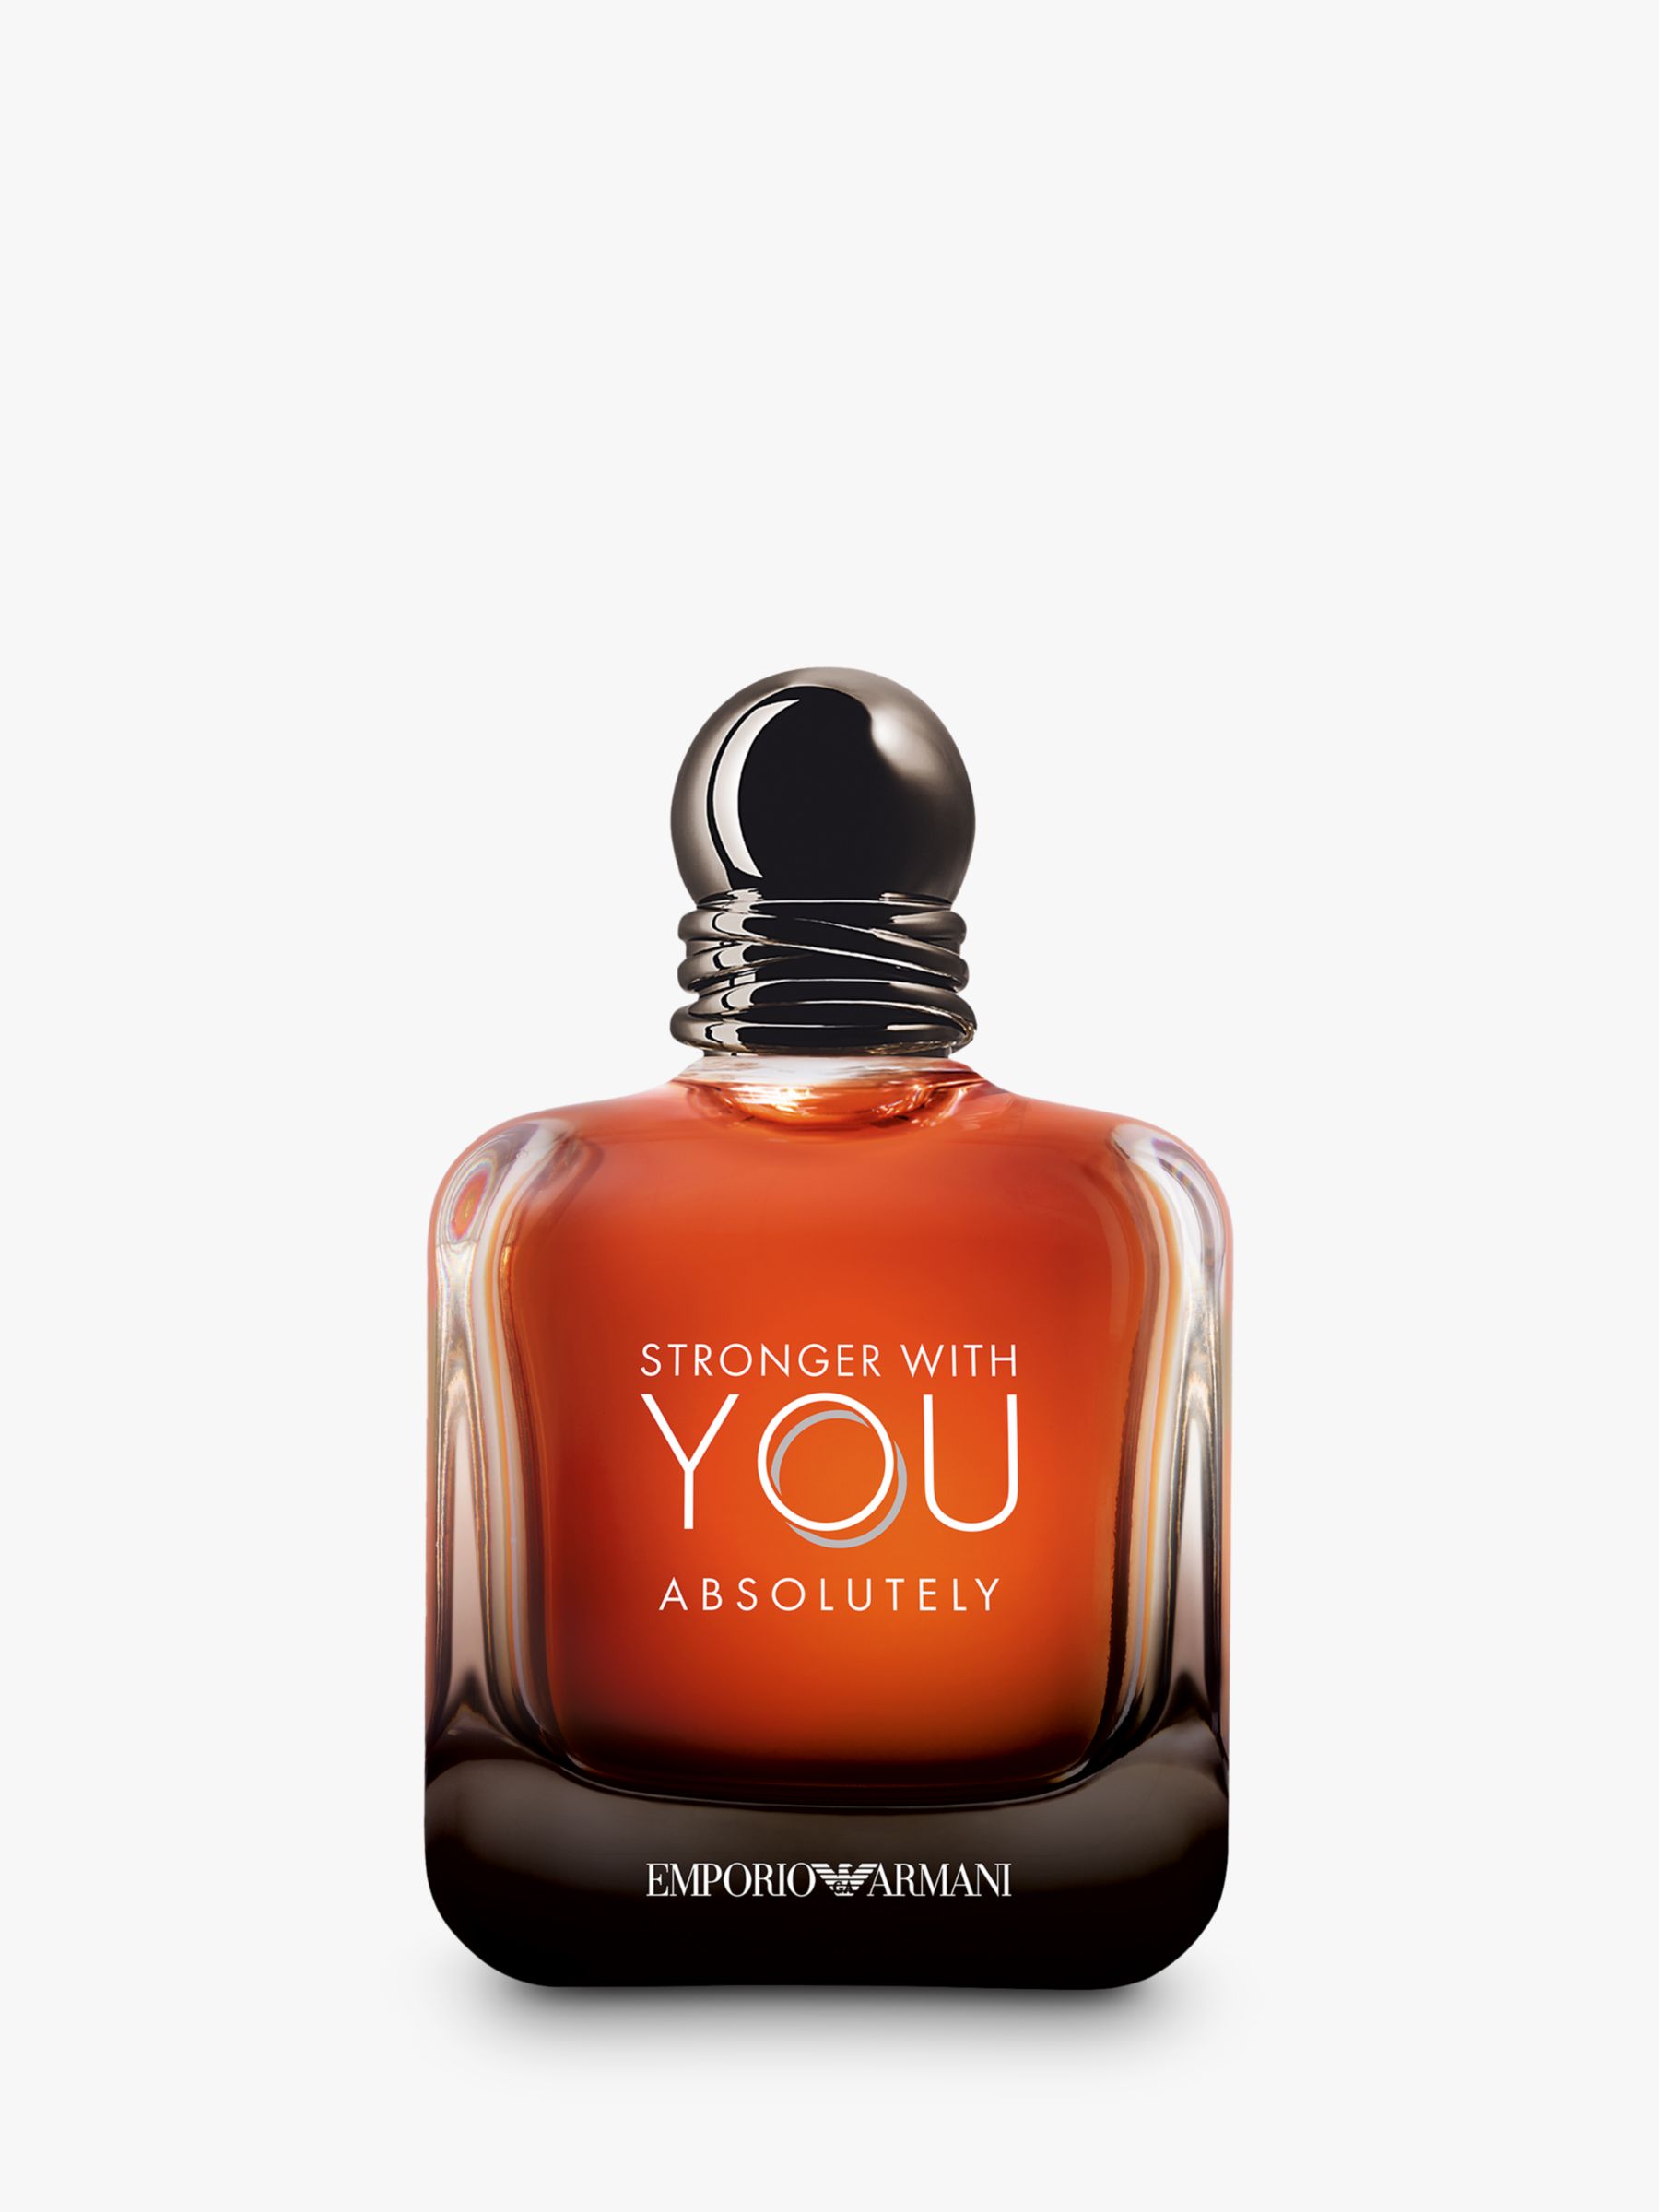 Emporio Armani Stronger With You Absolutely Parfum, 100ml at John Lewis ...